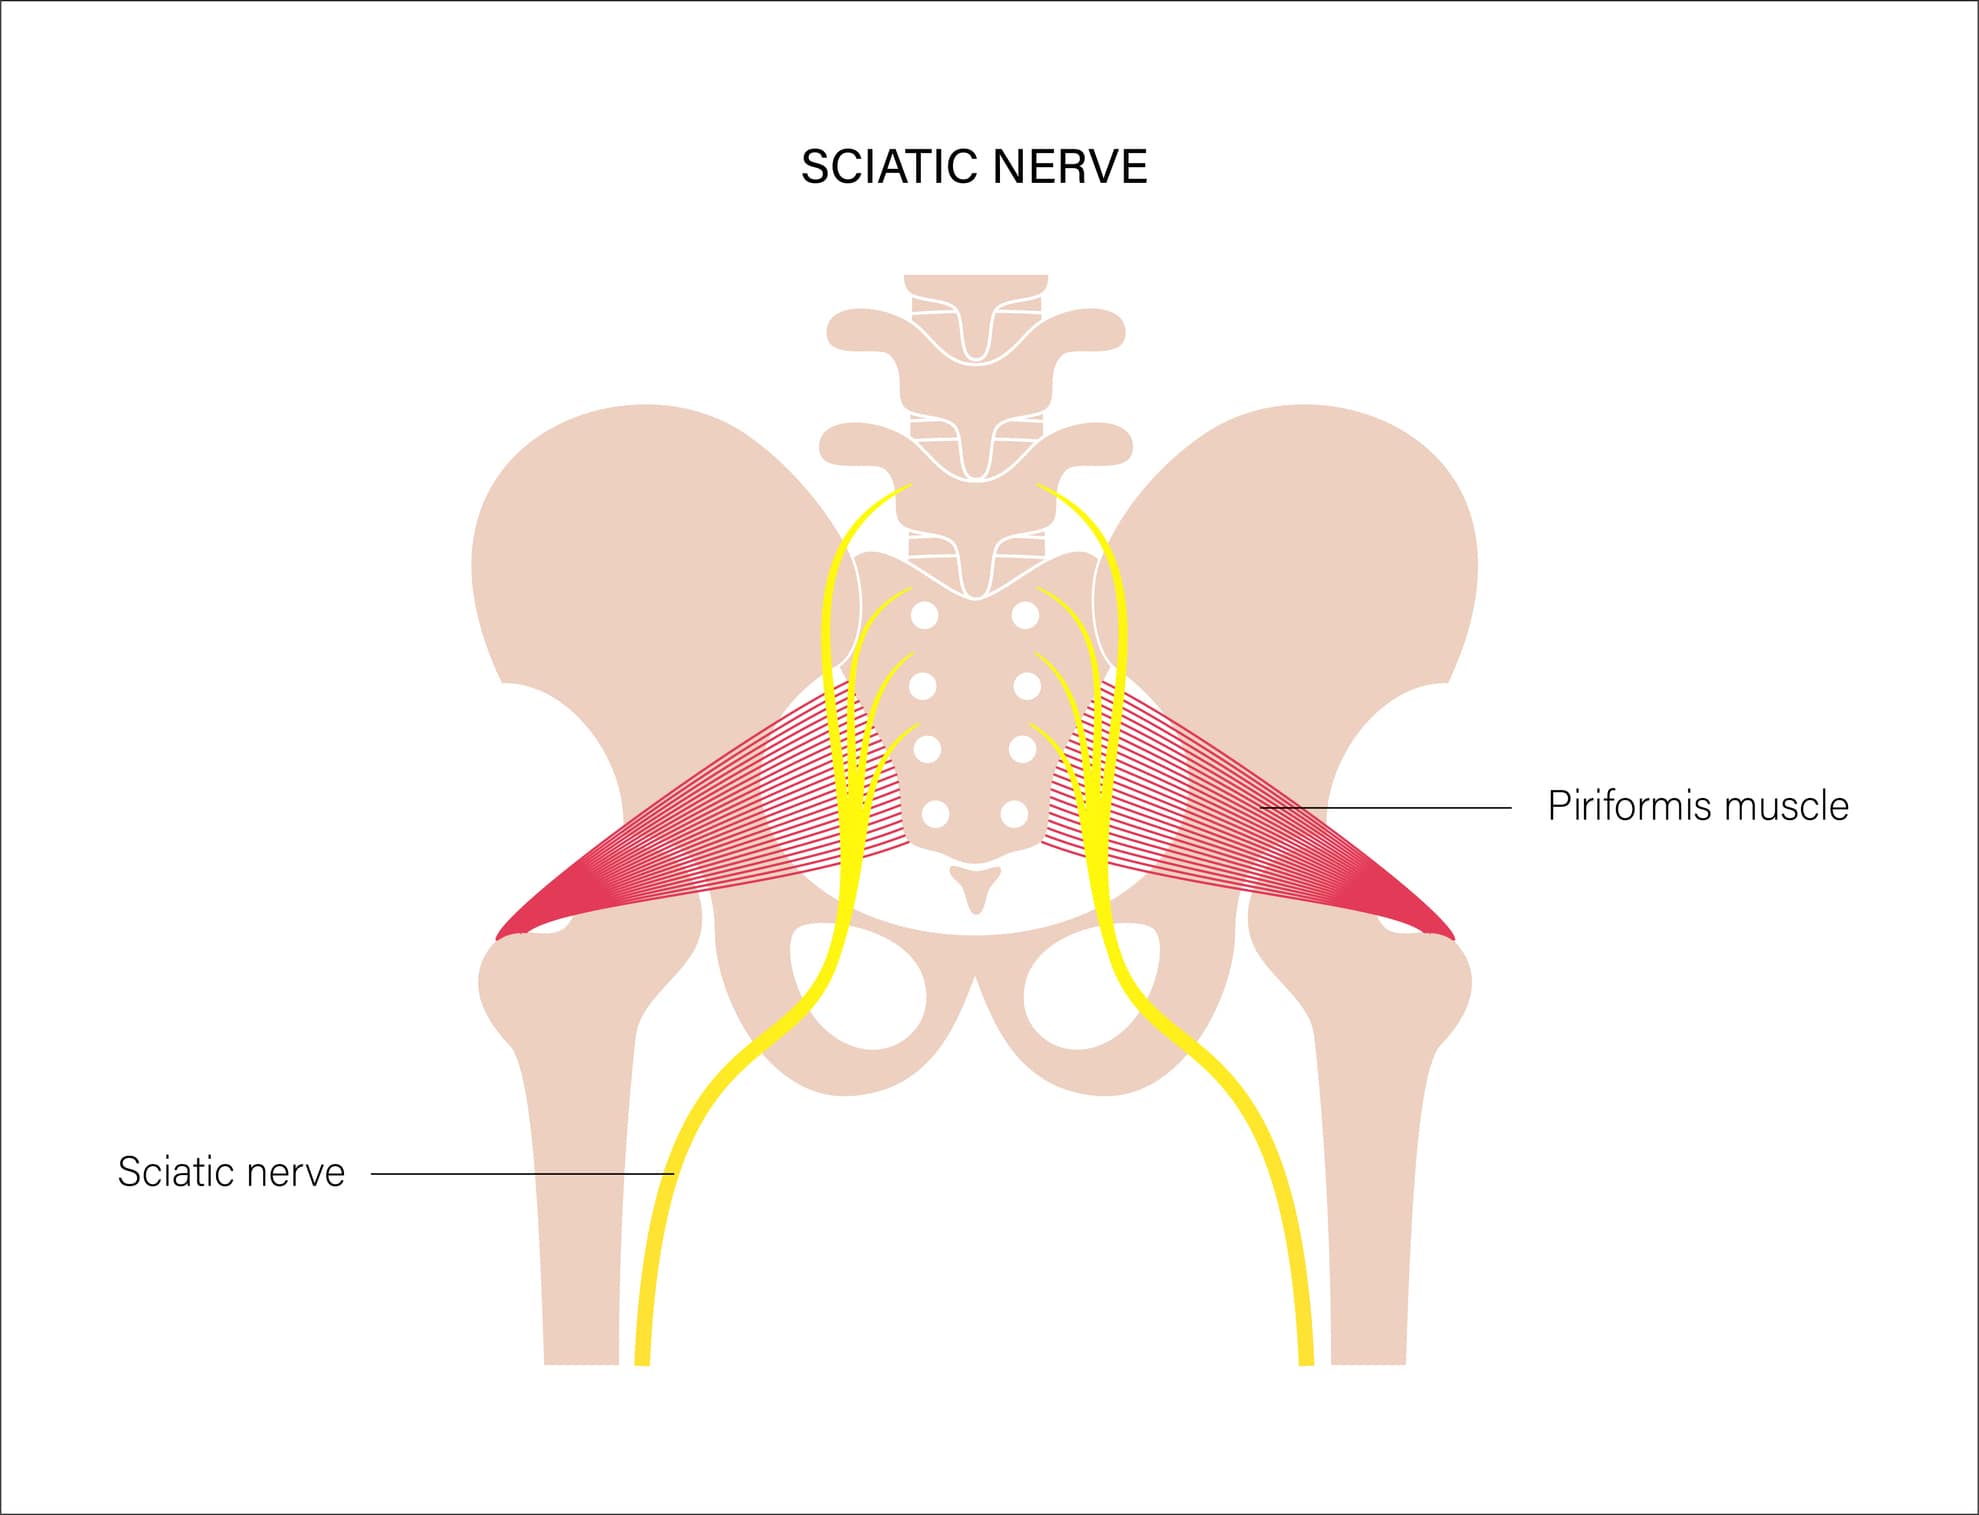 What is the end and long-lasting relief of piriformis syndrome